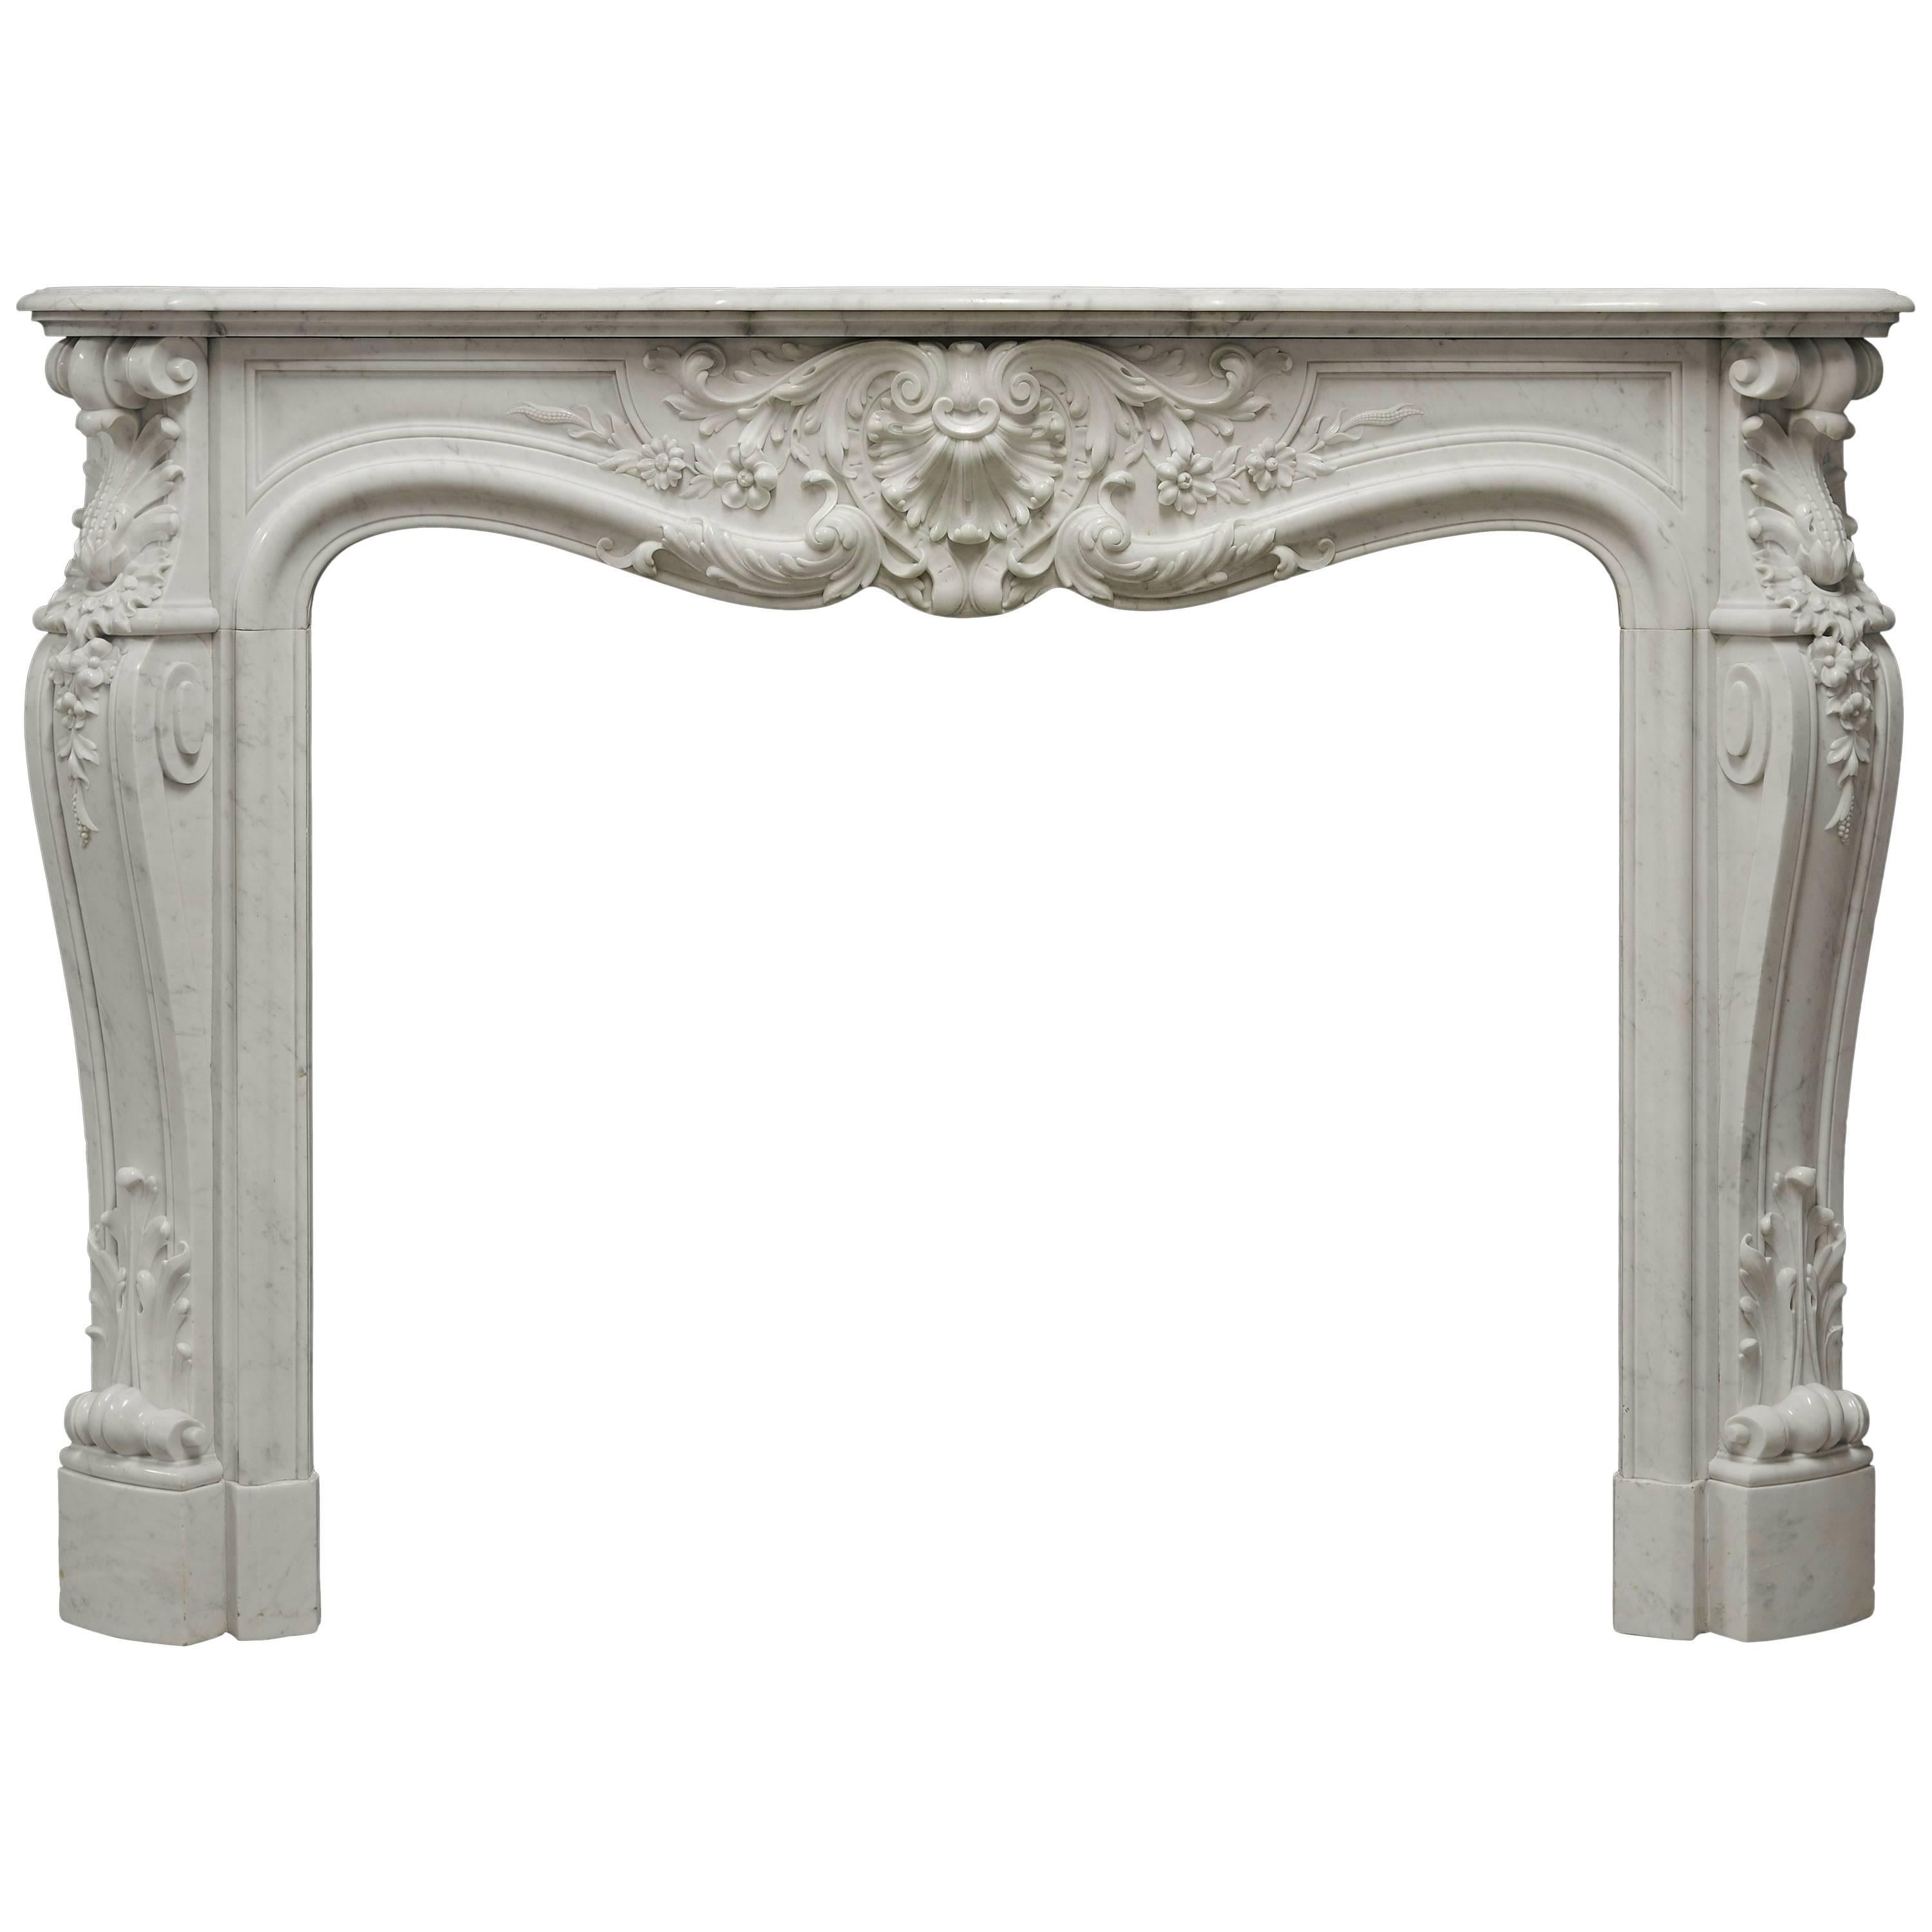 Beautiful Antique 19th Century French Louis XV Fireplace in Carrara White Marble